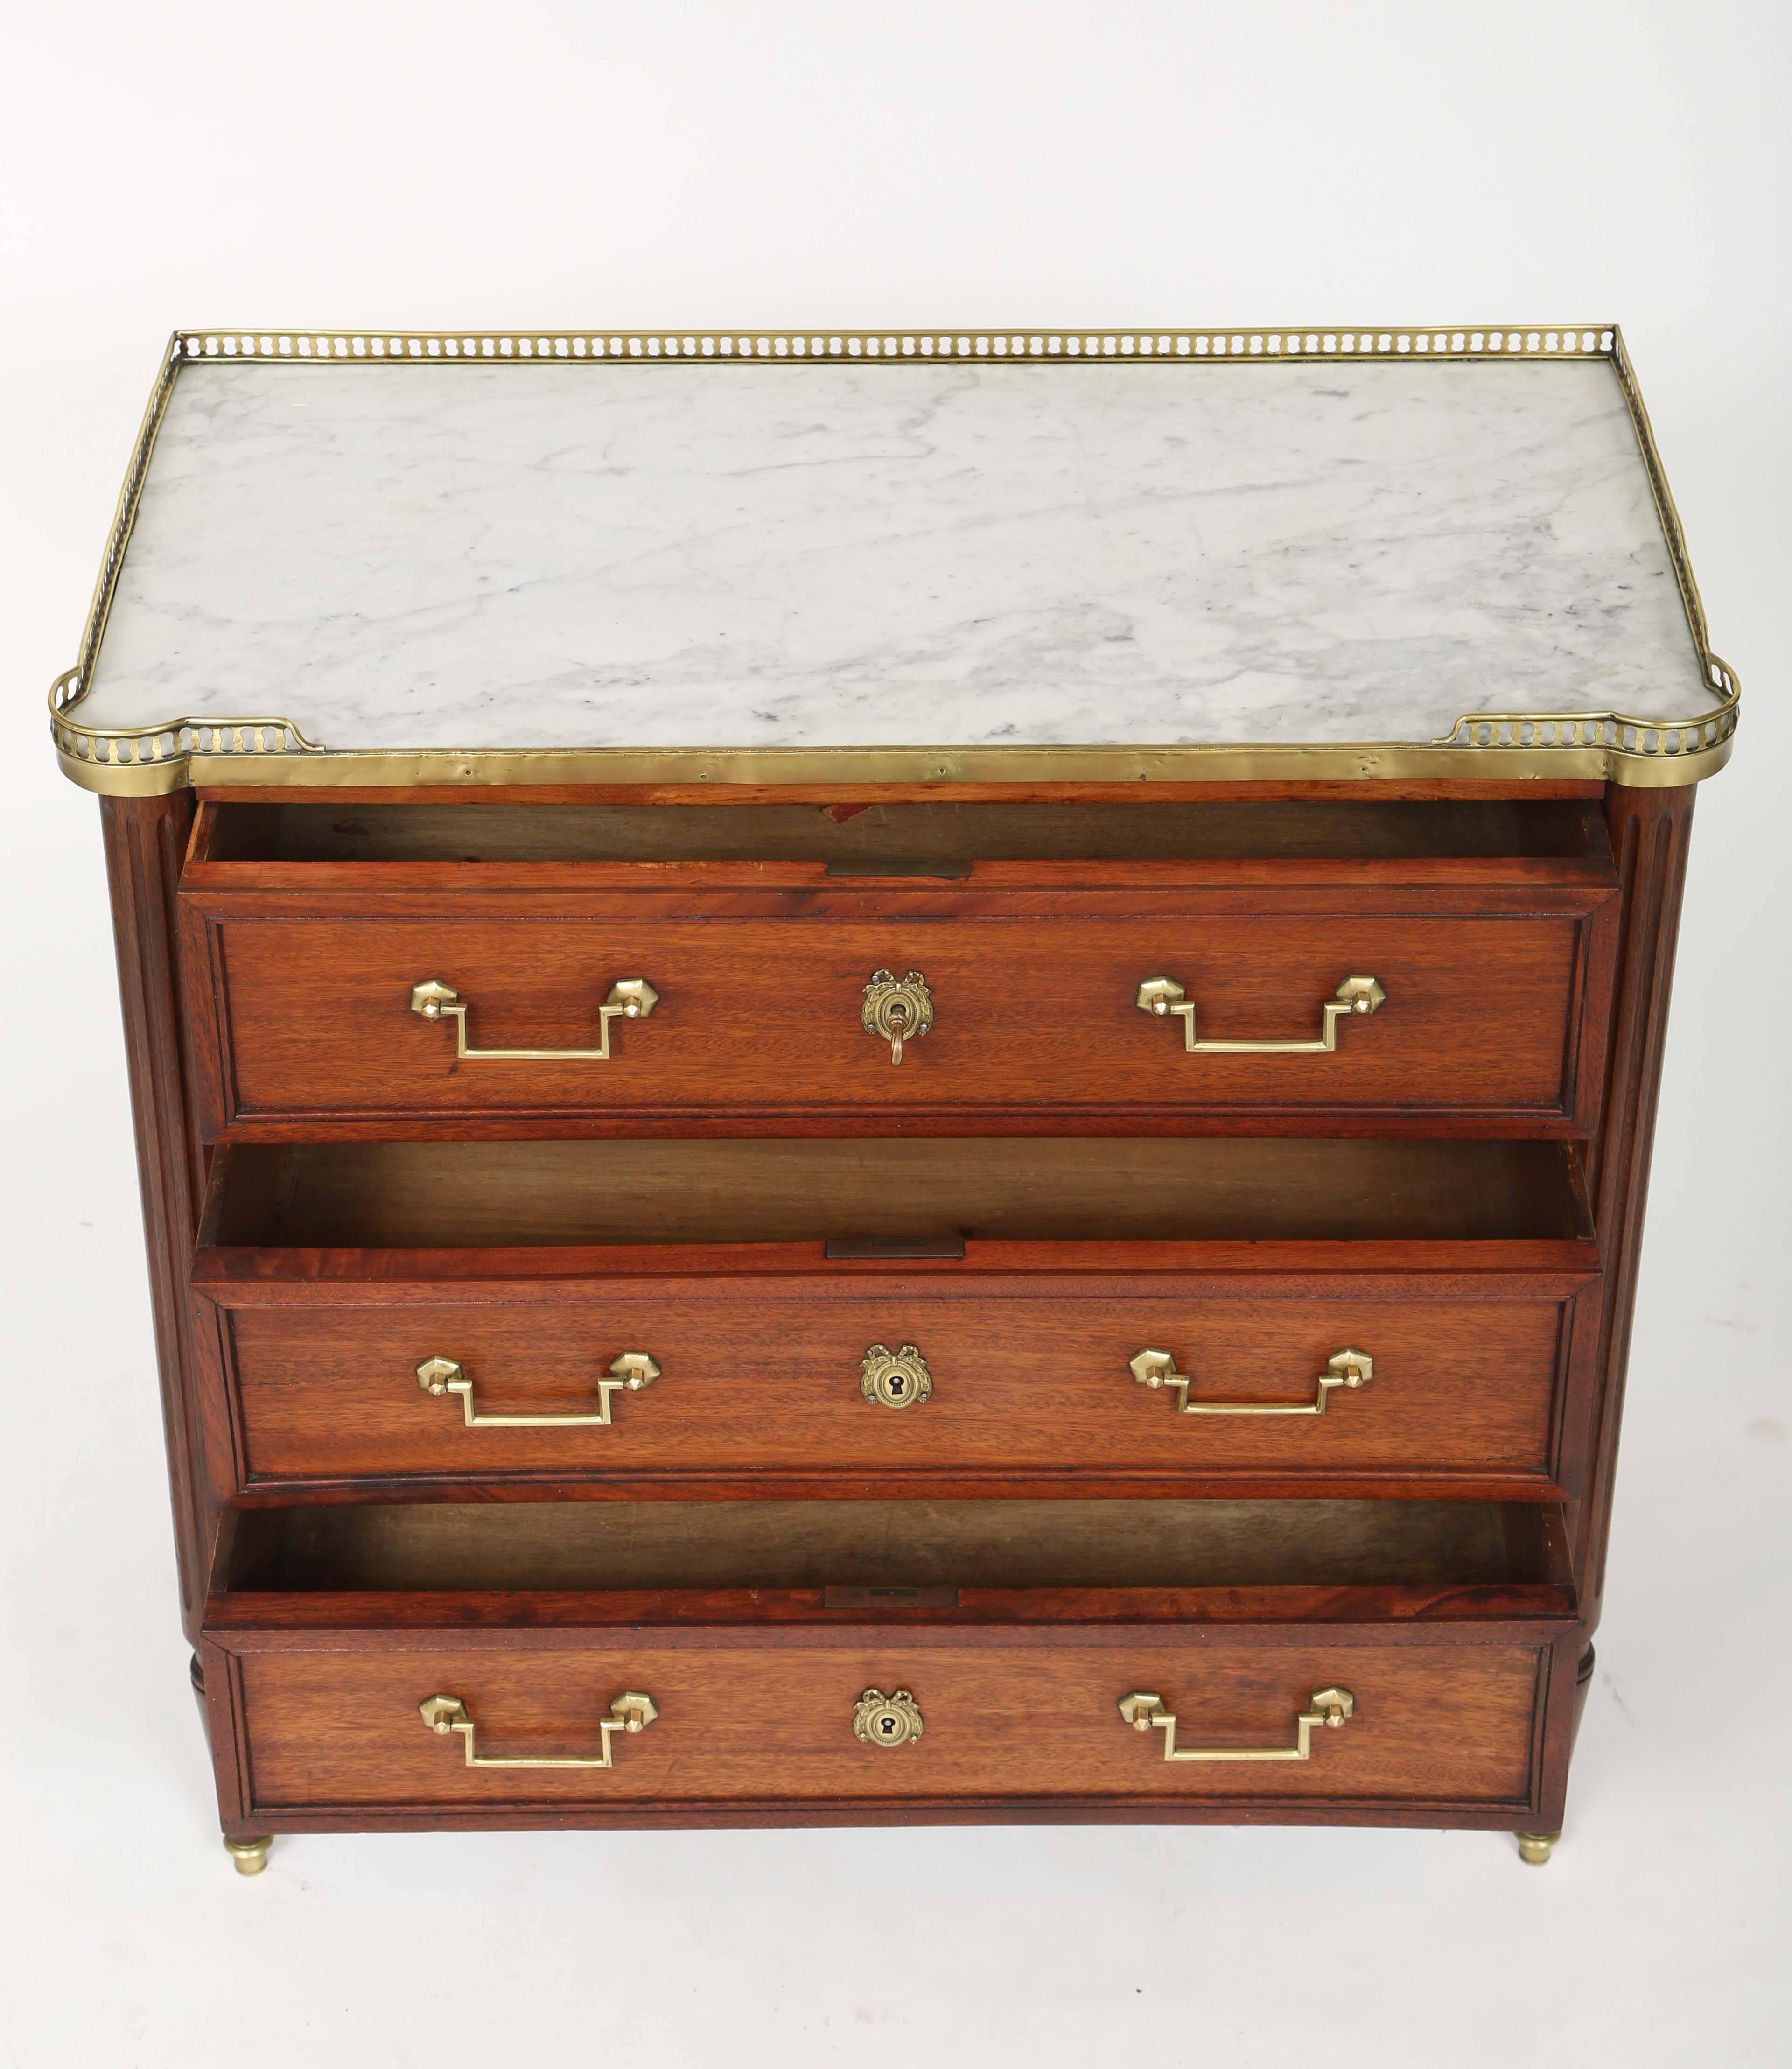 Louis XVI style mahogany and marble-top hall chest, having a rectangular marble top with turreted corners, under a pierced 3/4 gallery of brass, on a conforming case fitted with three long drawers, all paneled and with brass banding, raised on